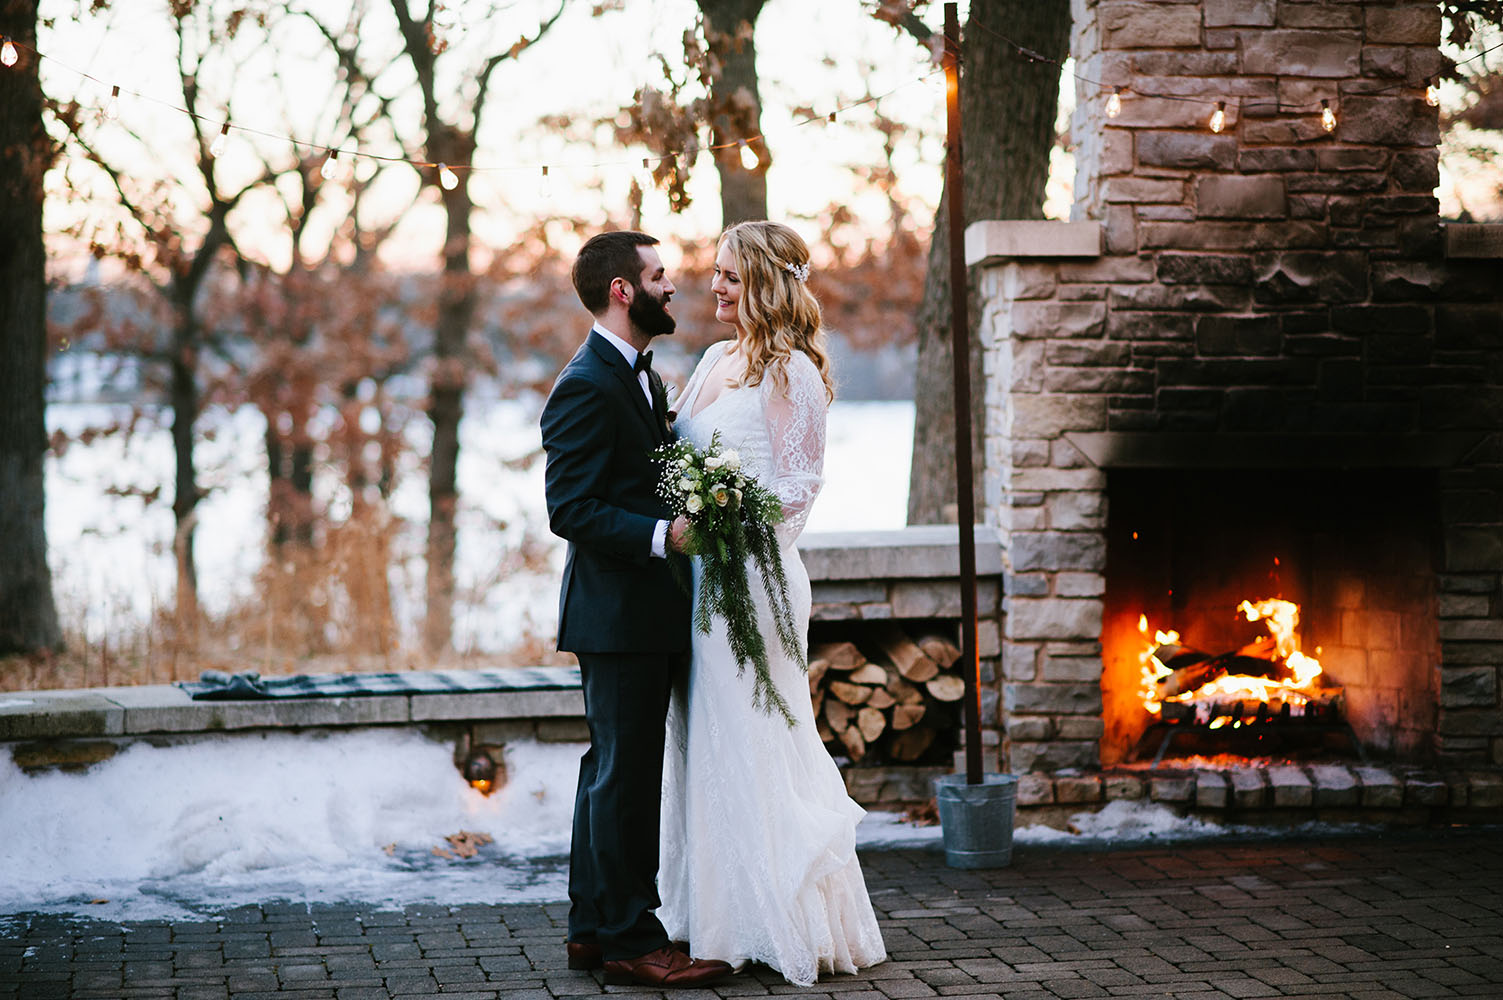 married couple by outdoor fireplace